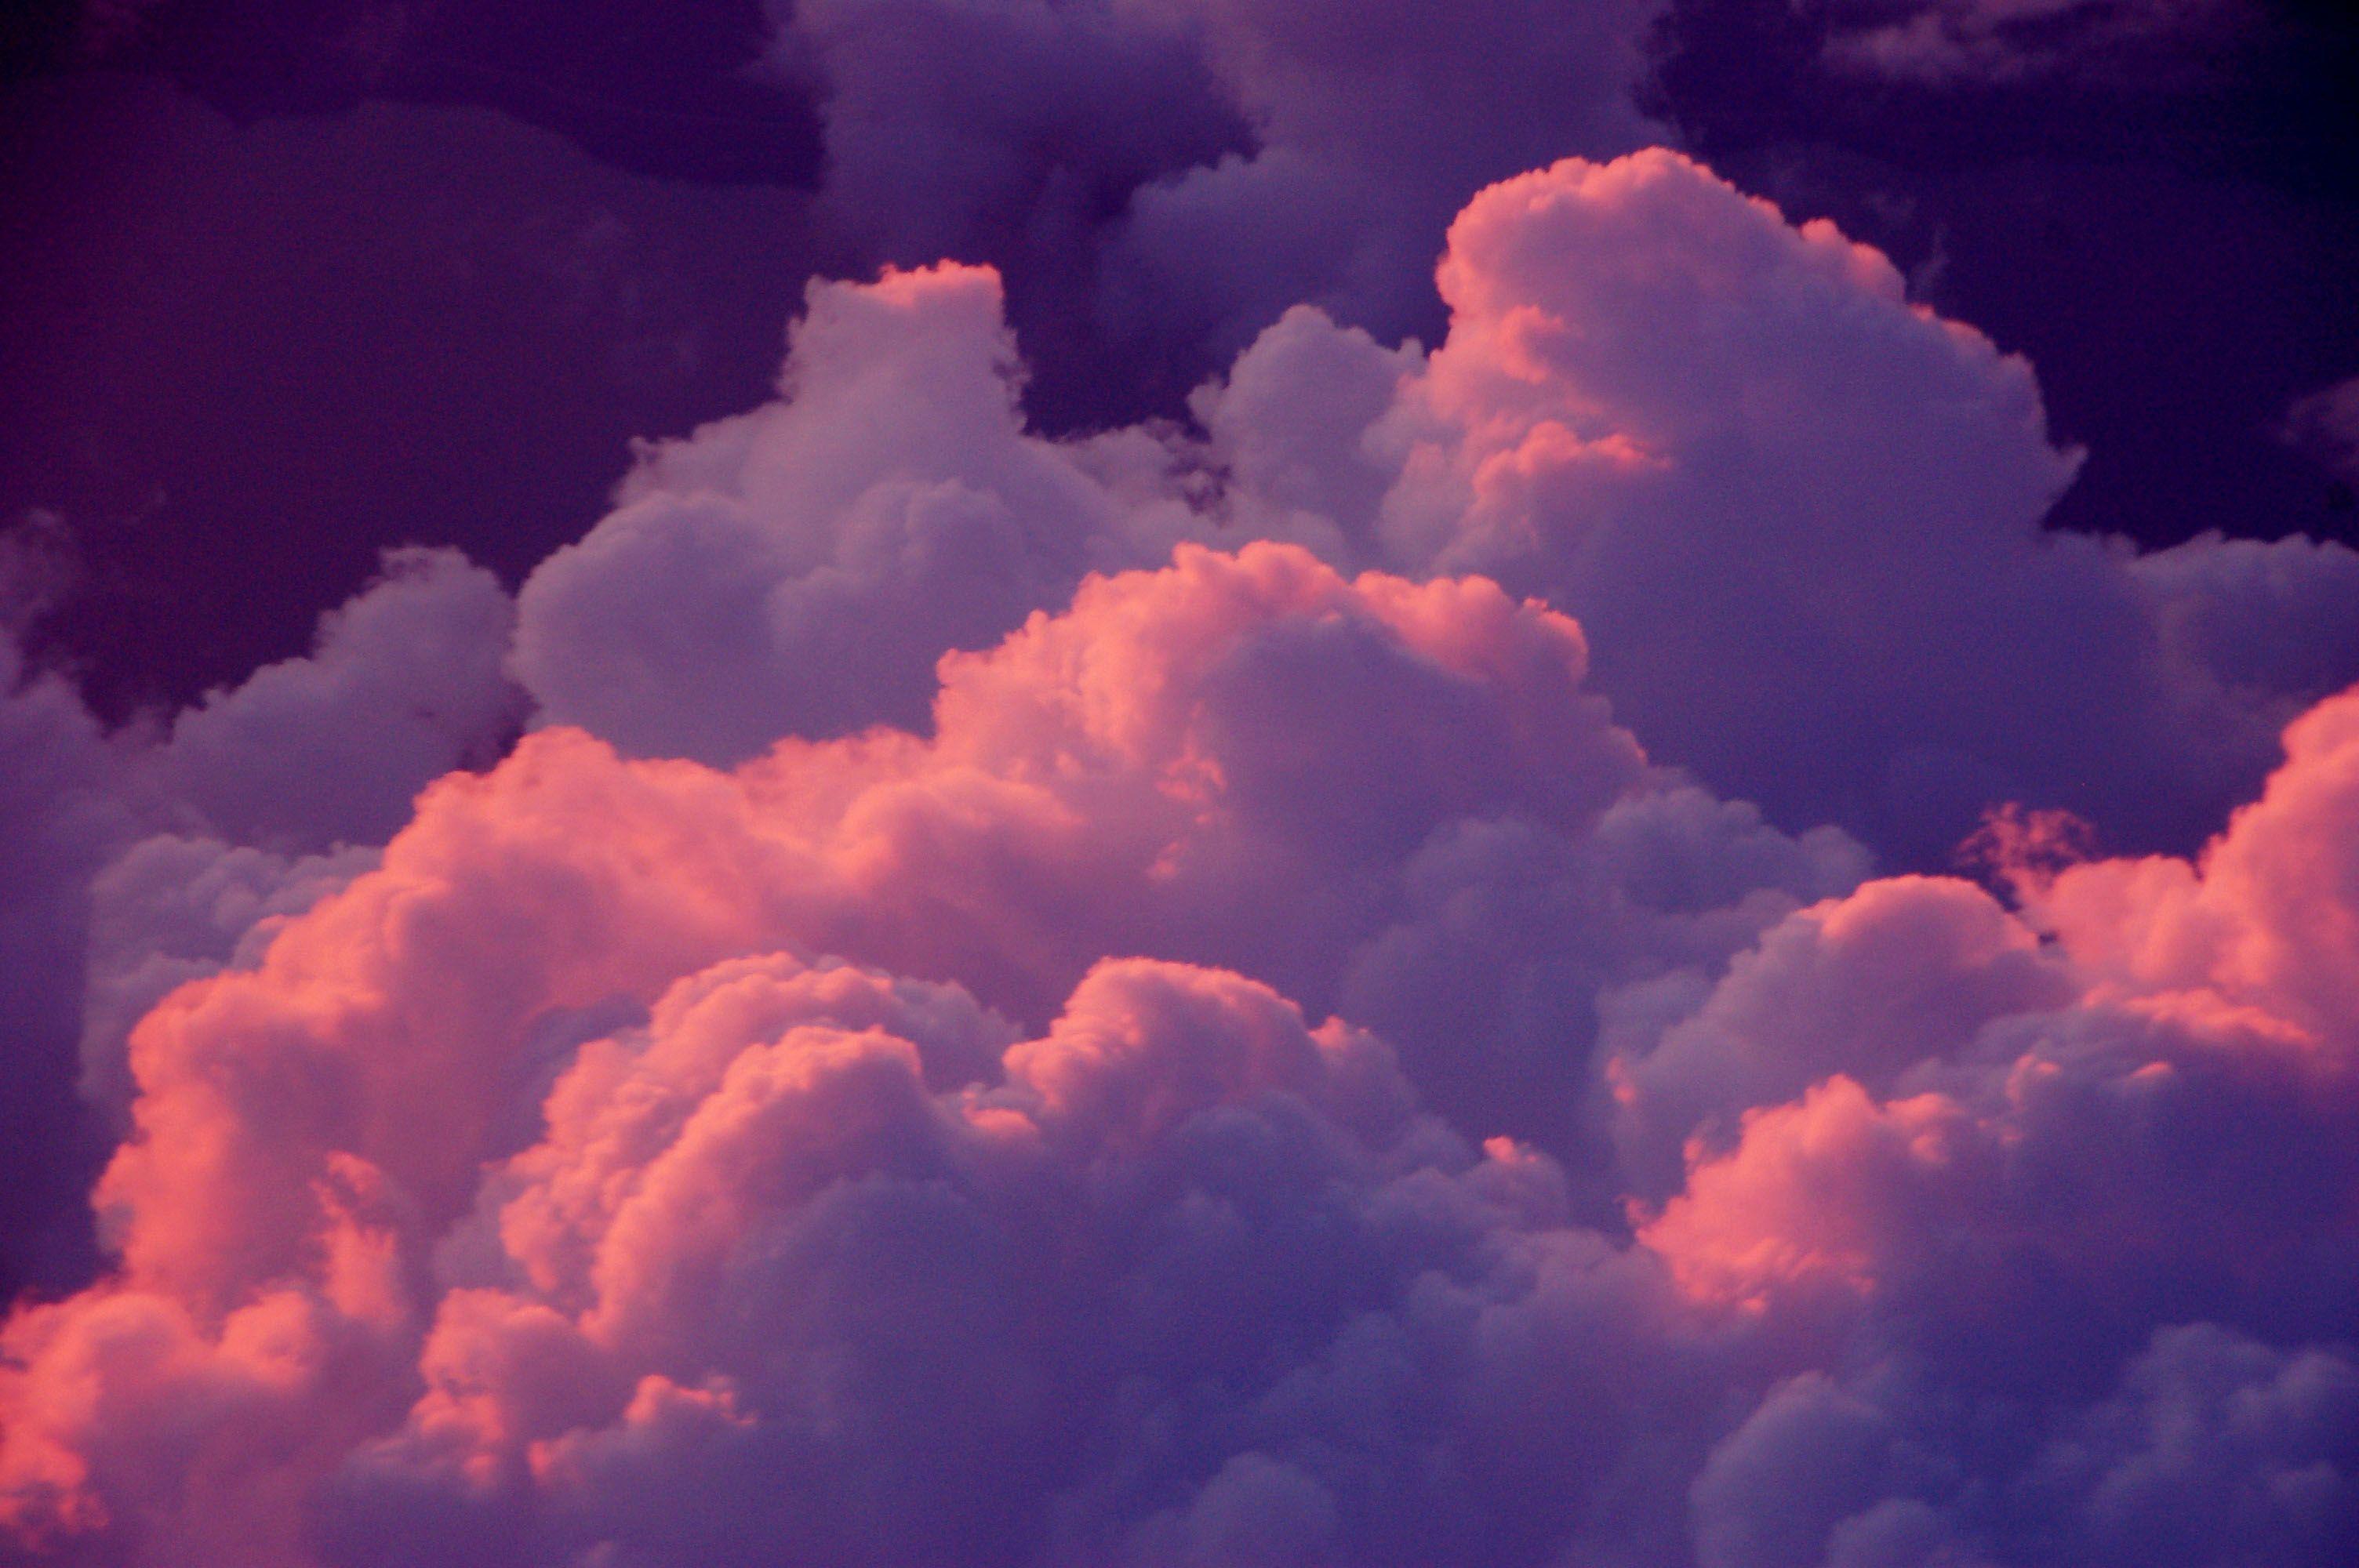 Cloud Sky Pastel Colored Background Wallpaper Stock Photo 1534528382   Shutterstock